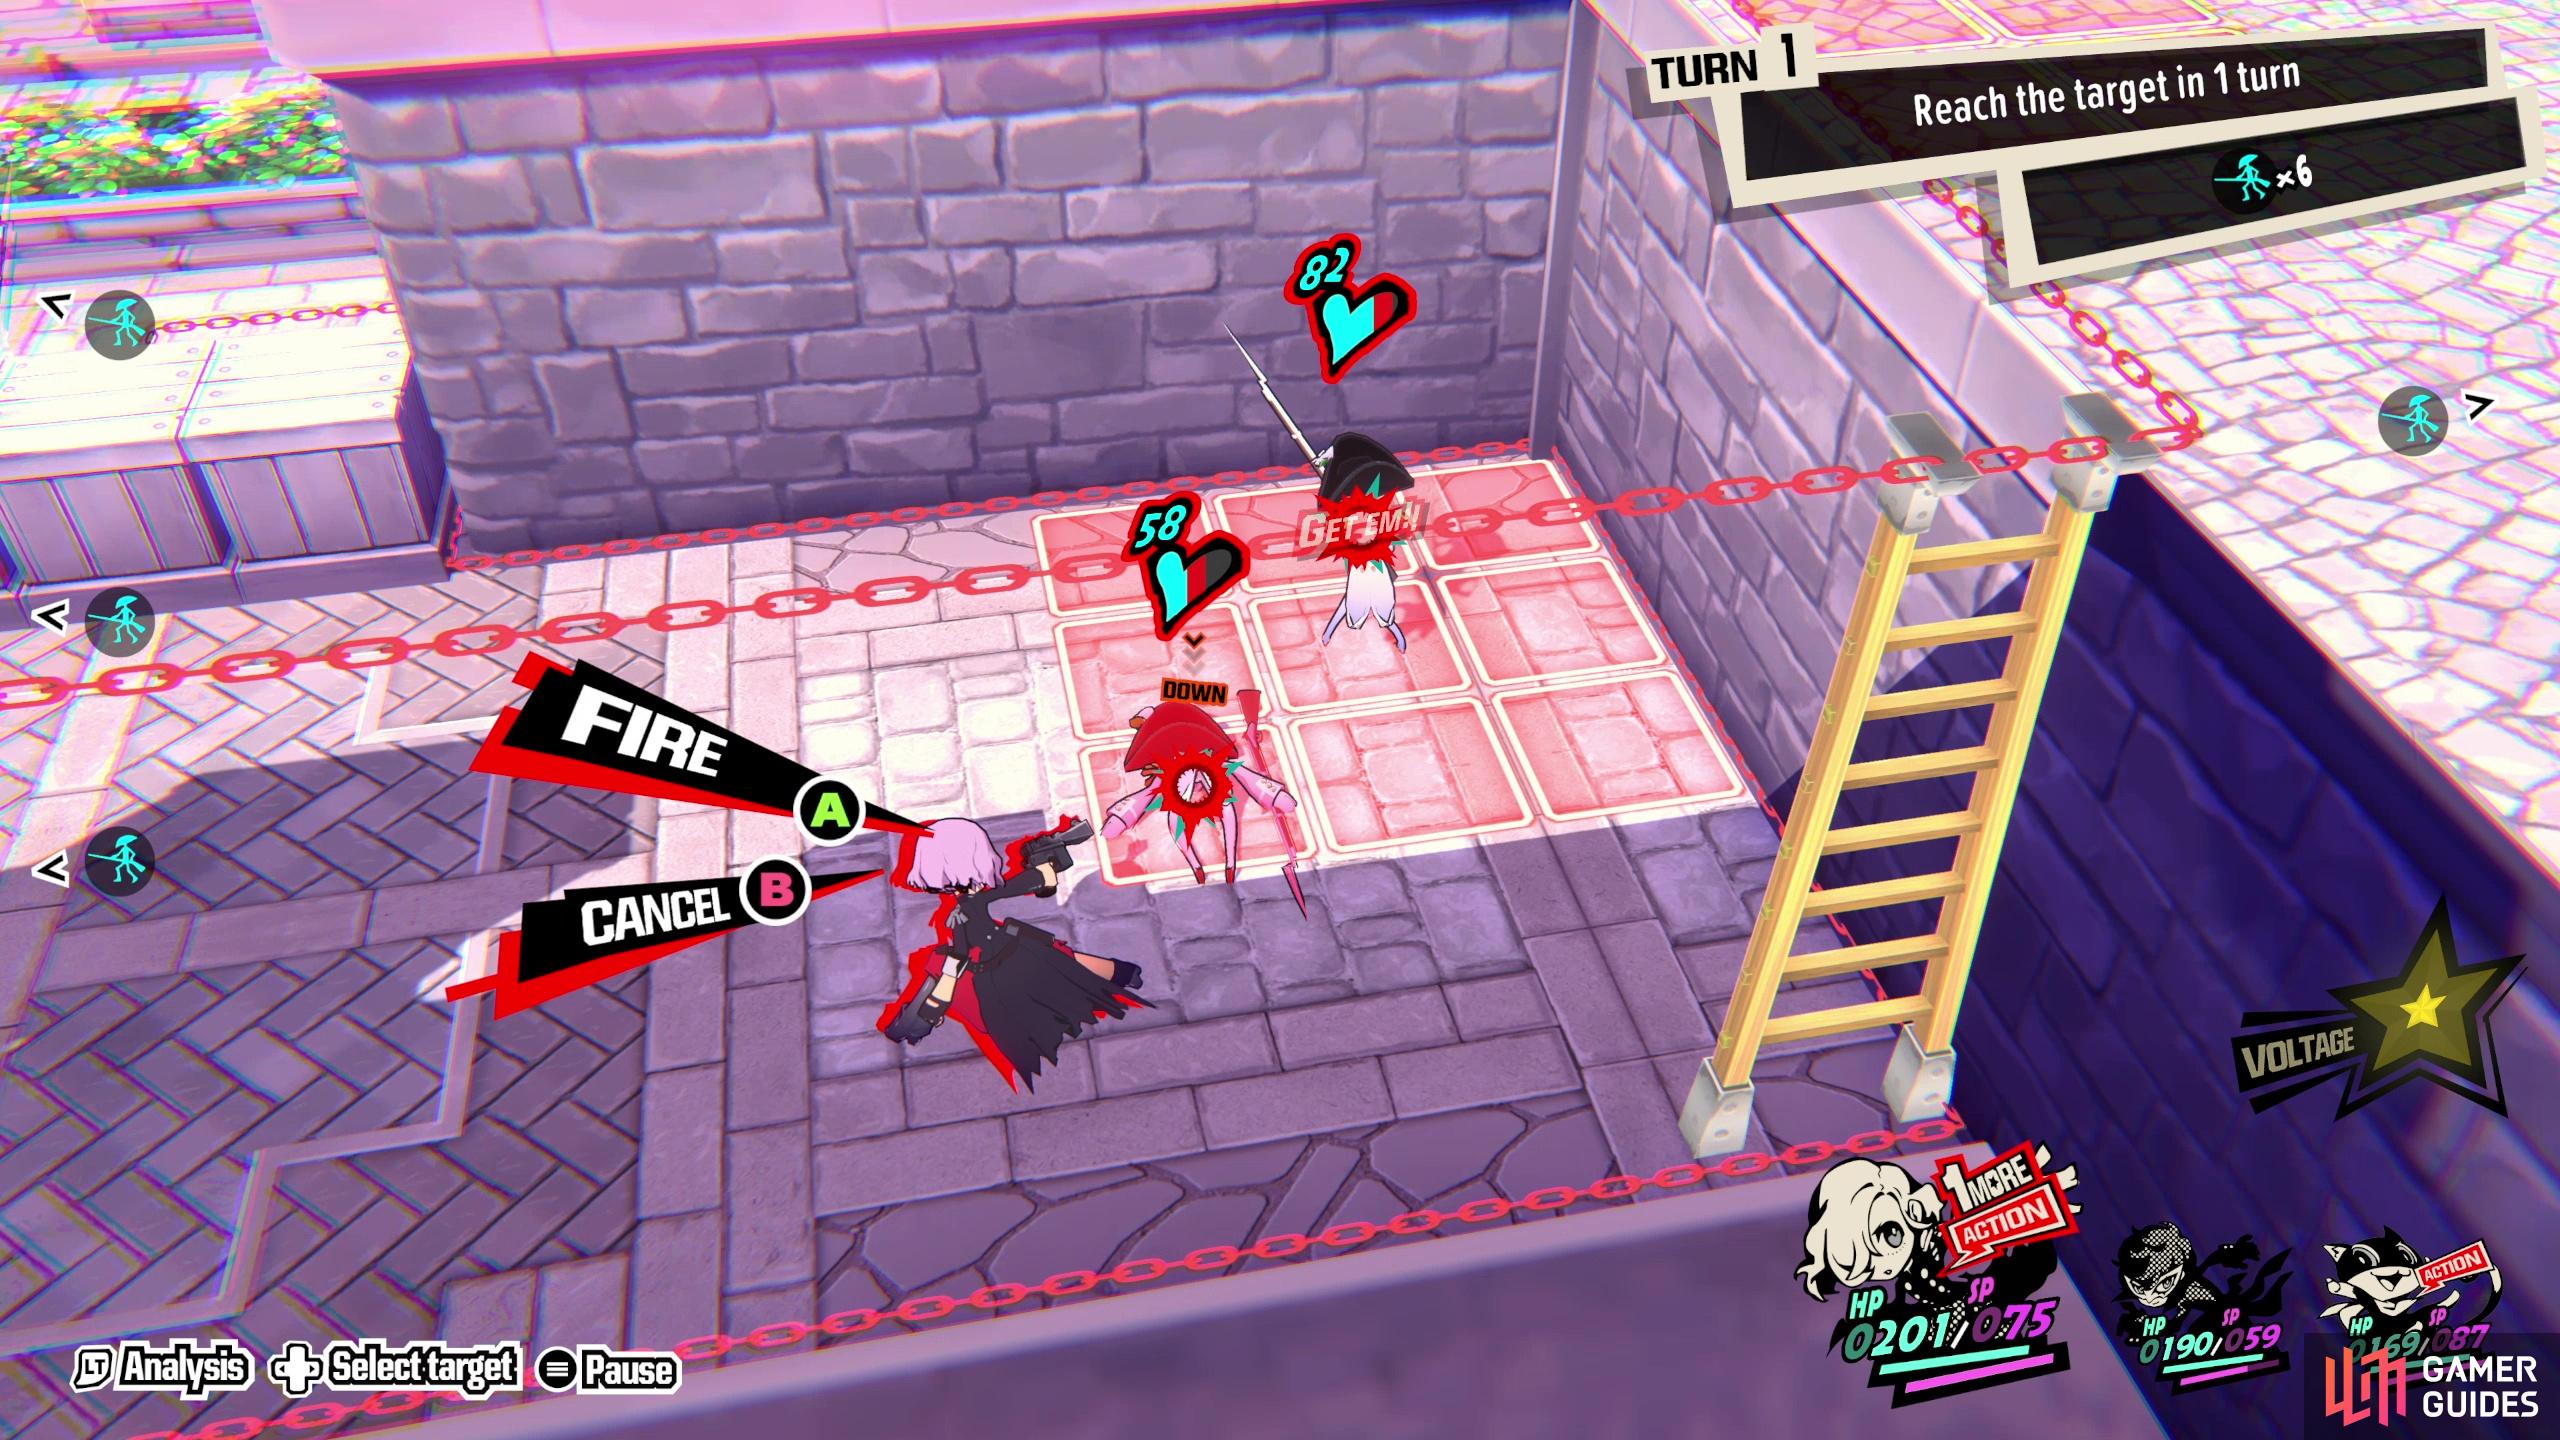 Climb down a ladder and shoot the two enemies Joker knocked down earlier to earn a second One More.